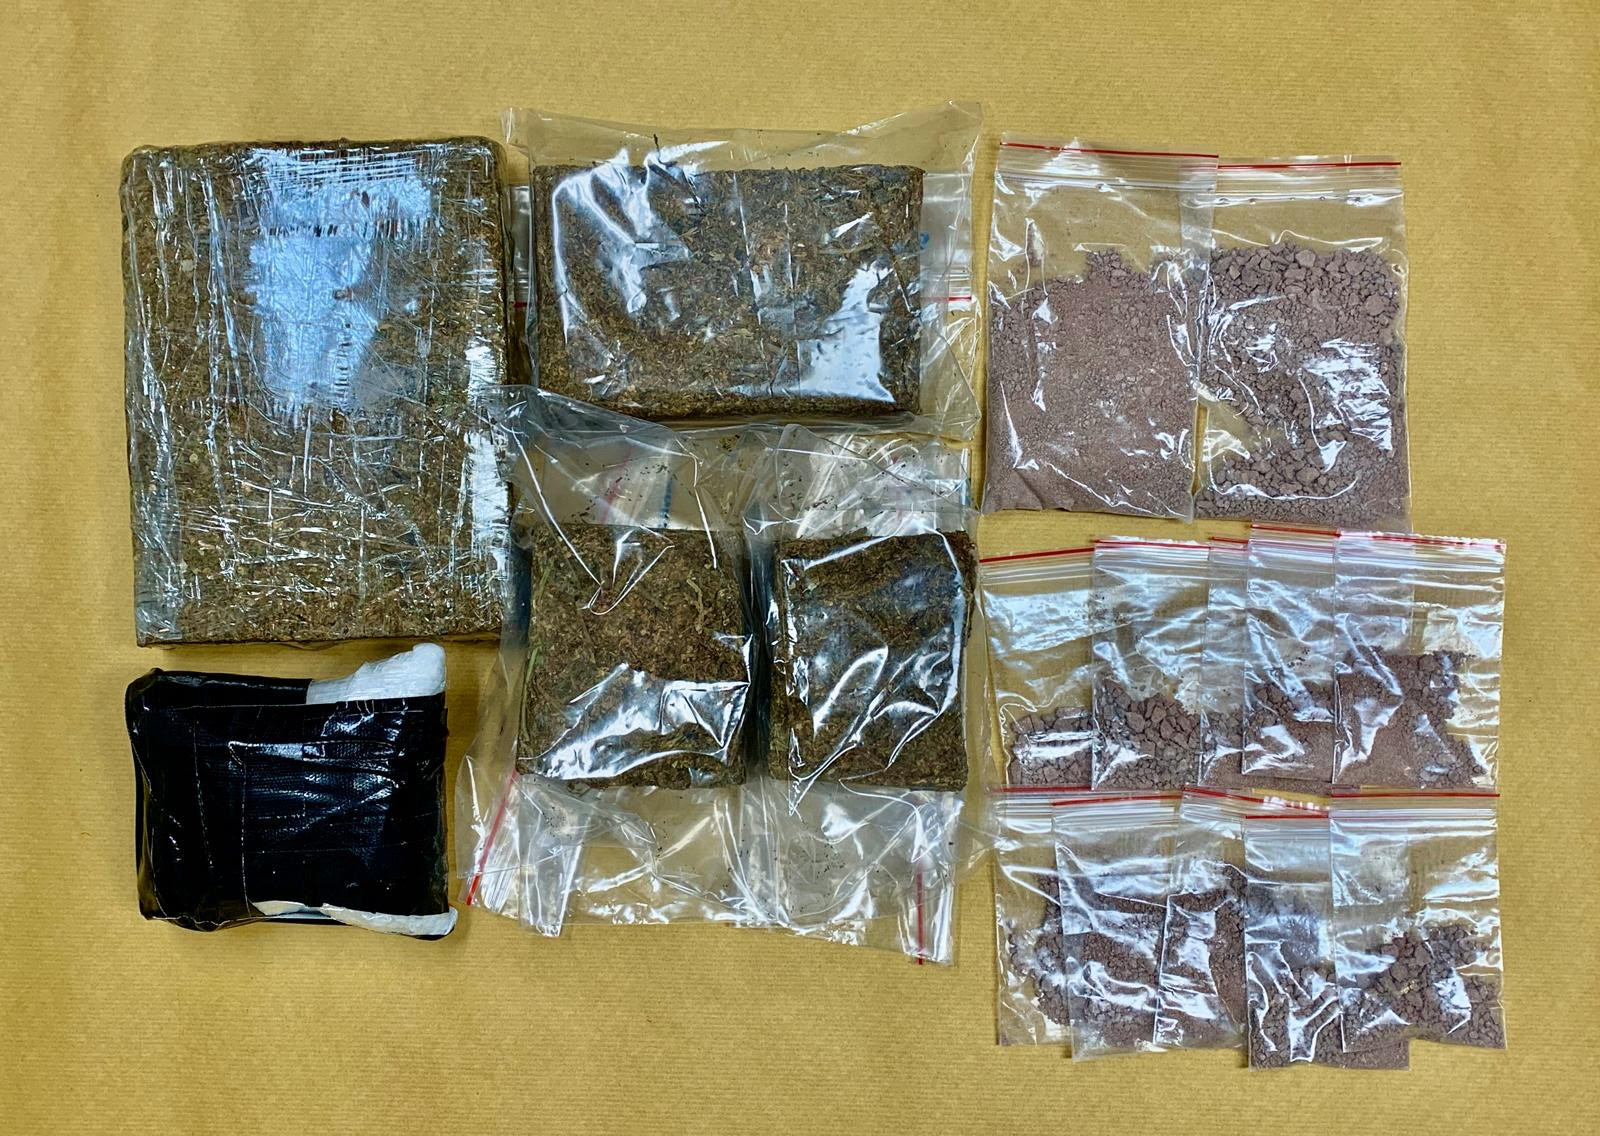 Photo 3 (CNB) – A total of about 550g of ‘Ice’, about 291g of heroin, and about 2kg of cannabis were seized from the operations in the vicinity of Ang Mo Kio Ave 5, Ang Mo Kio Ave 10, and Bukit Panjang Ring Road.